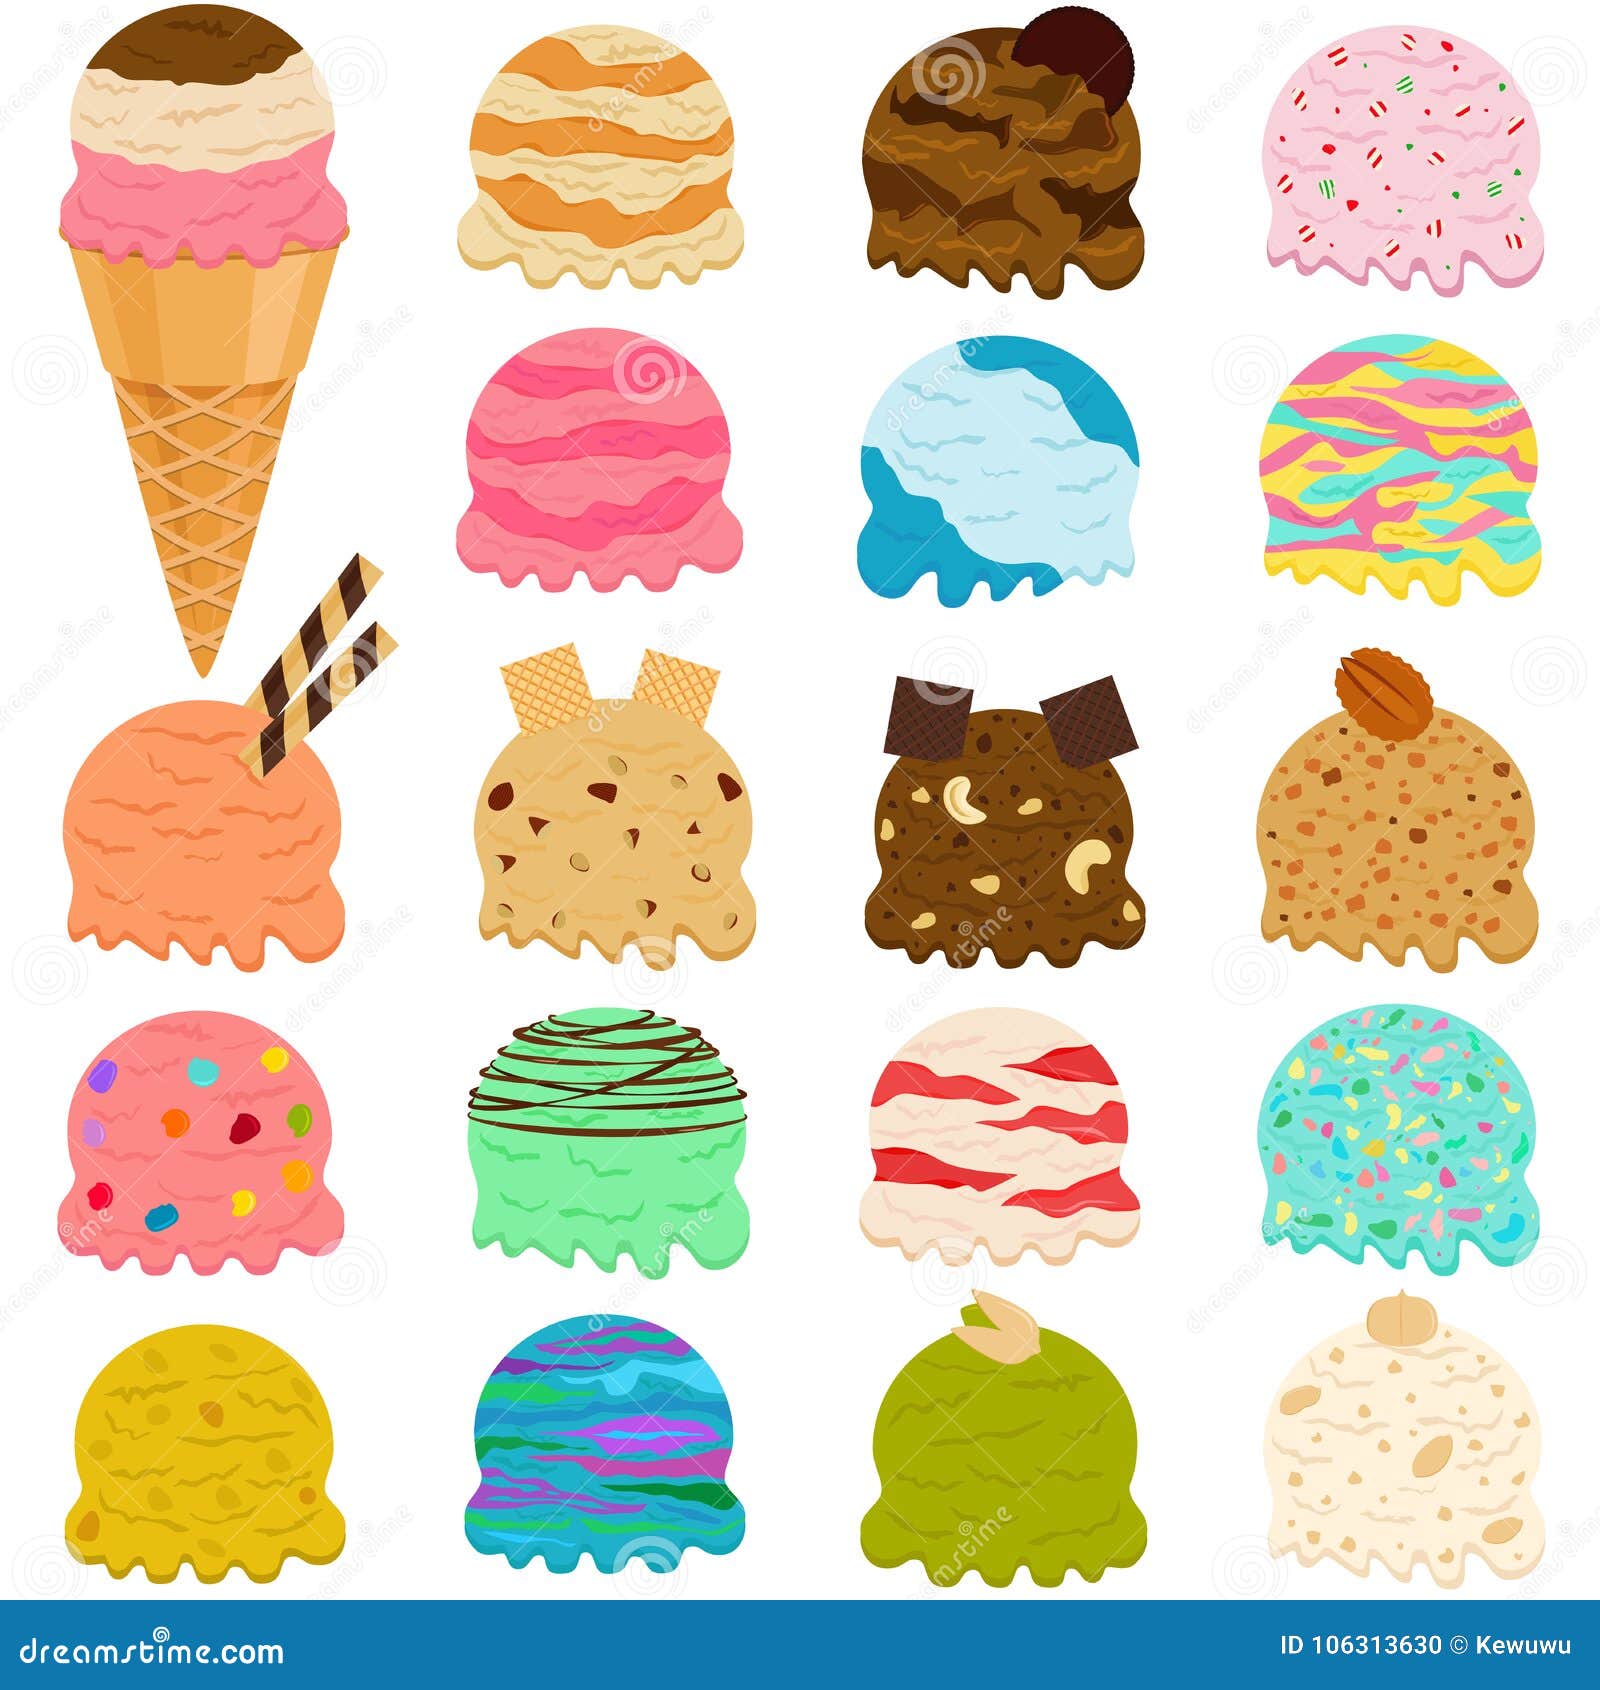 https://thumbs.dreamstime.com/z/cute-vector-illustration-set-ice-cream-scoop-many-colorful-f-flavors-toppings-wafer-cone-isolated-white-background-106313630.jpg